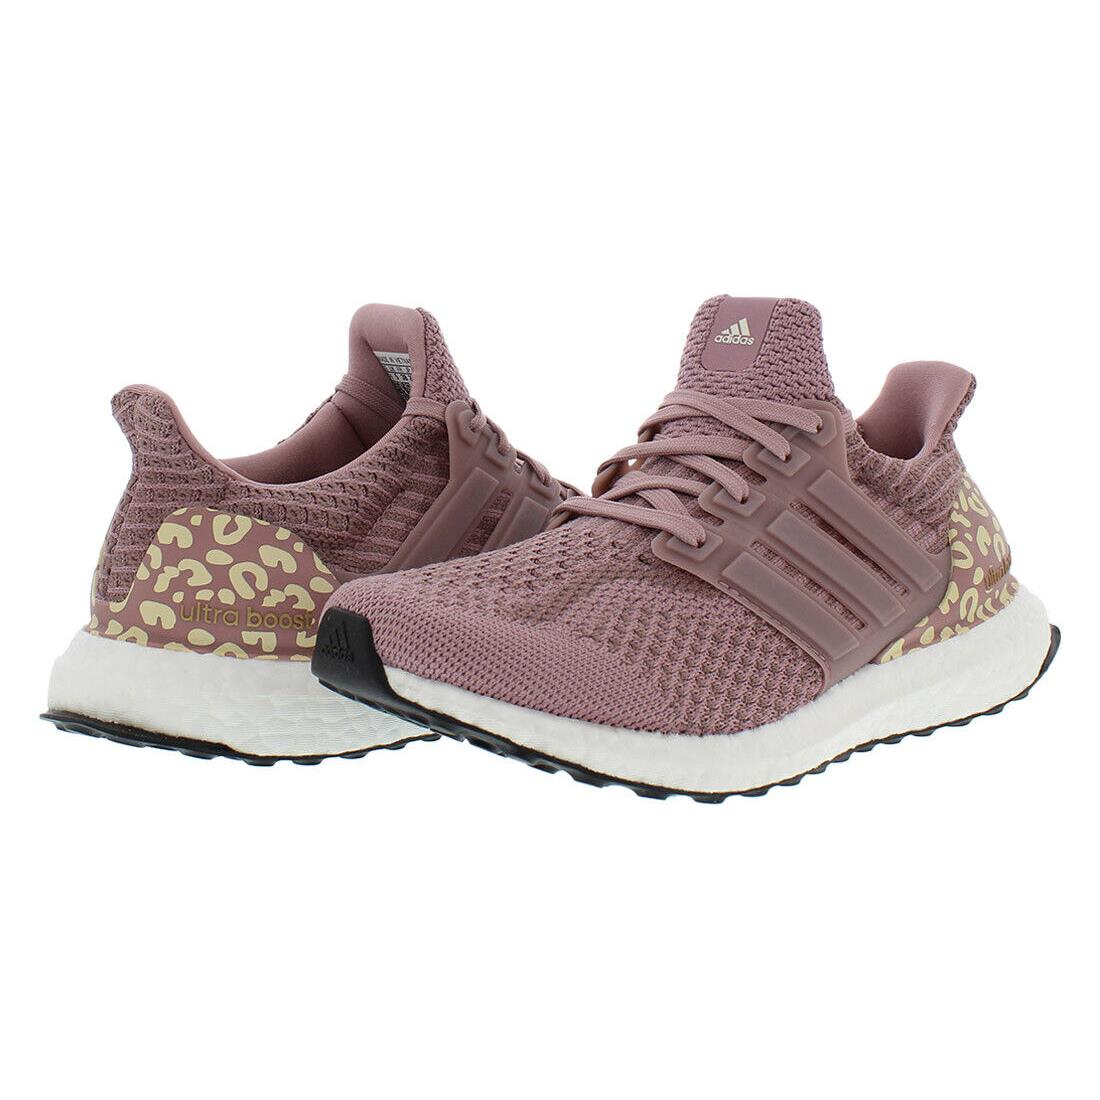 Adidas Ultraboost 5.0 Dna Womens Shoes - Pink, Main: Pink